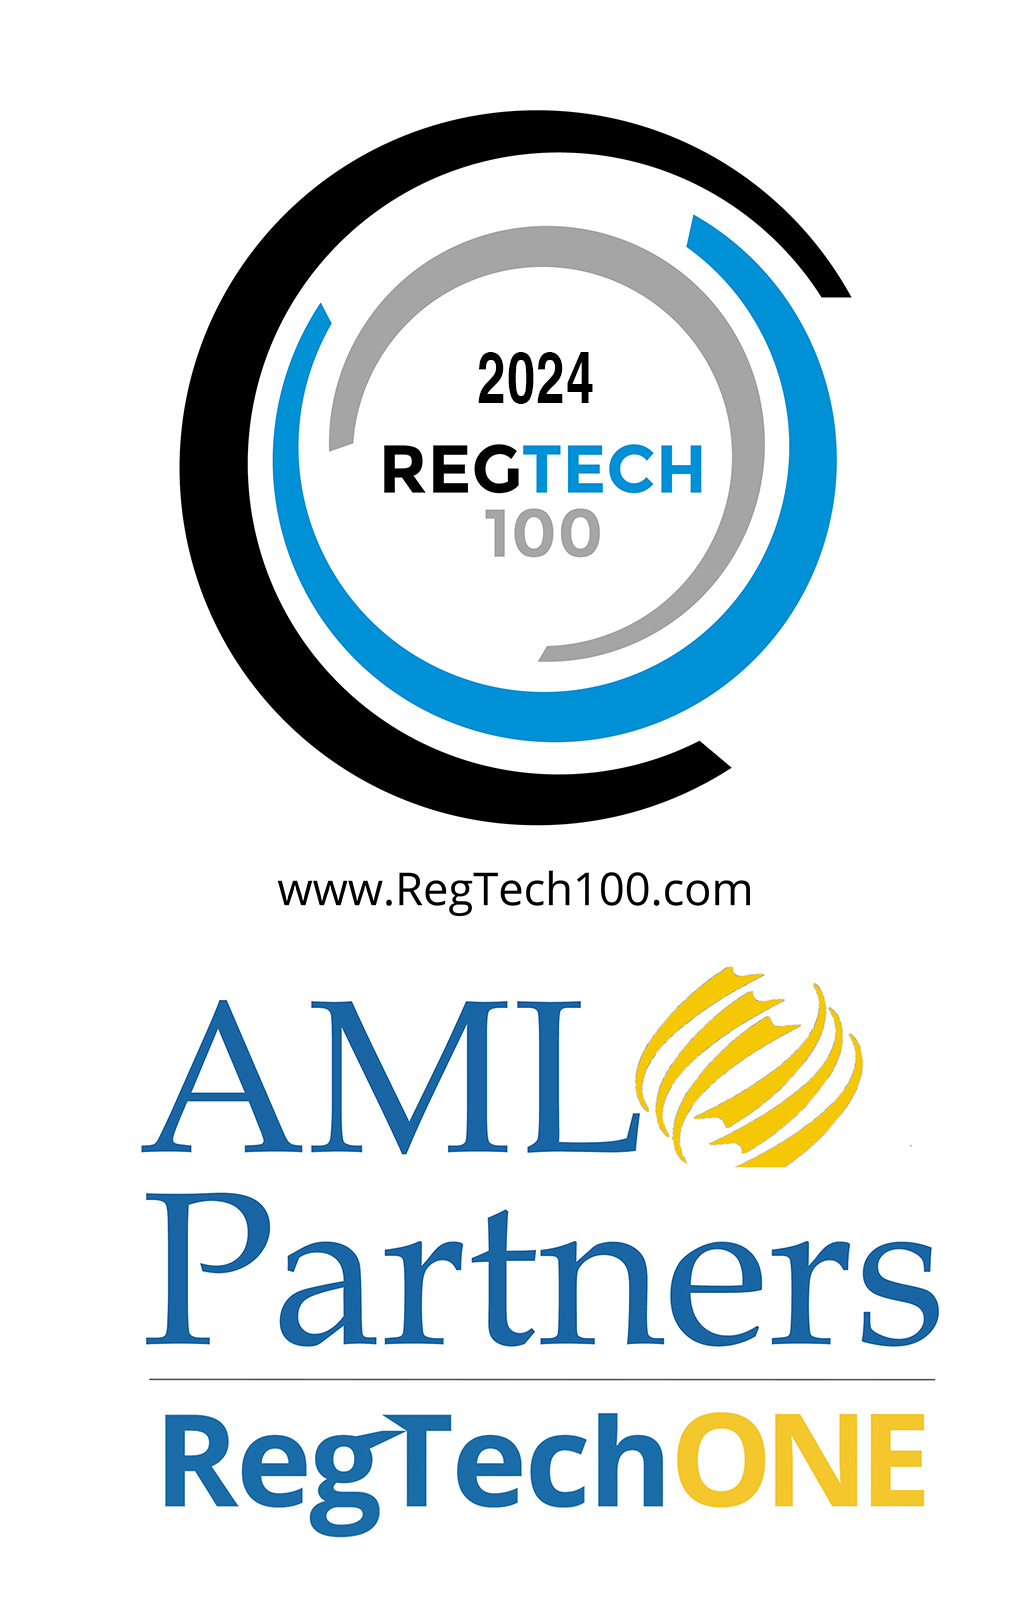 Art shows the logo of the RegTech100 program for 2024 and the logo of AML Partners and their RegTechONE platform for AML Compliance, GRC, KYC/CDD onboarding, and related Risk Management.